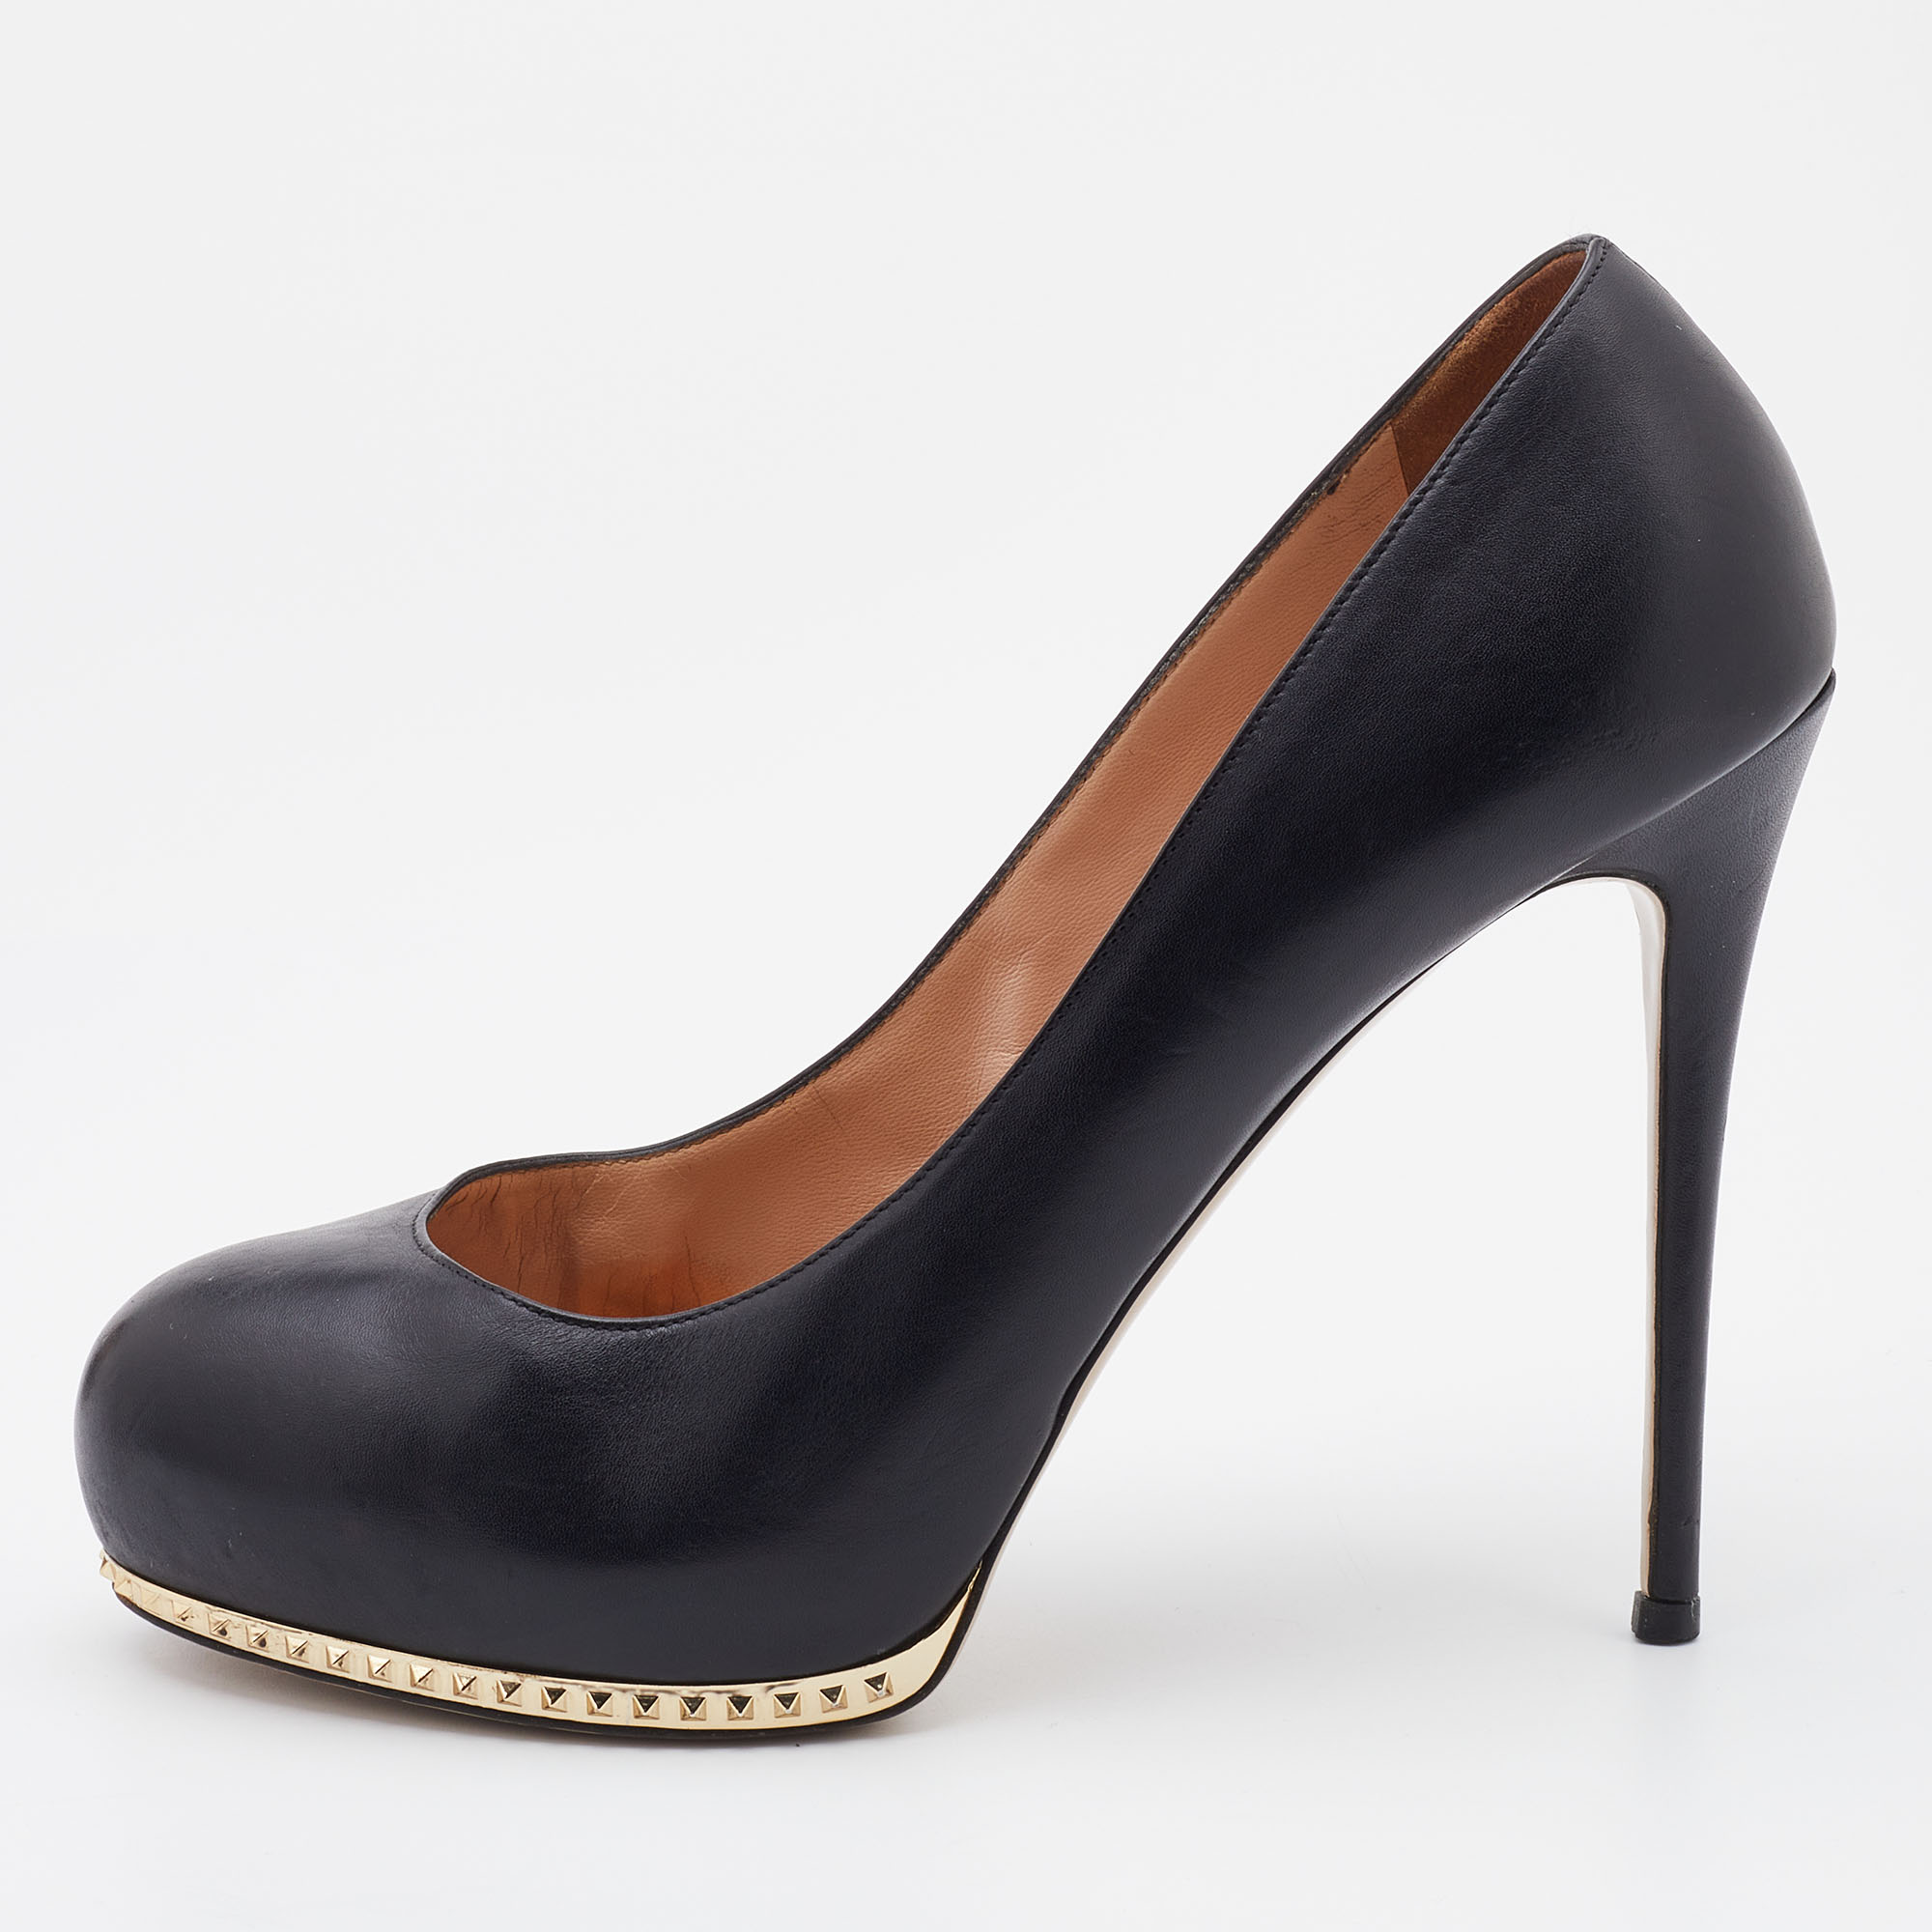 These pumps are a great choice if you're looking to add a pair thats both classy and versatile. The pair has been made using only the best kind of materials to ensure lasting wear.